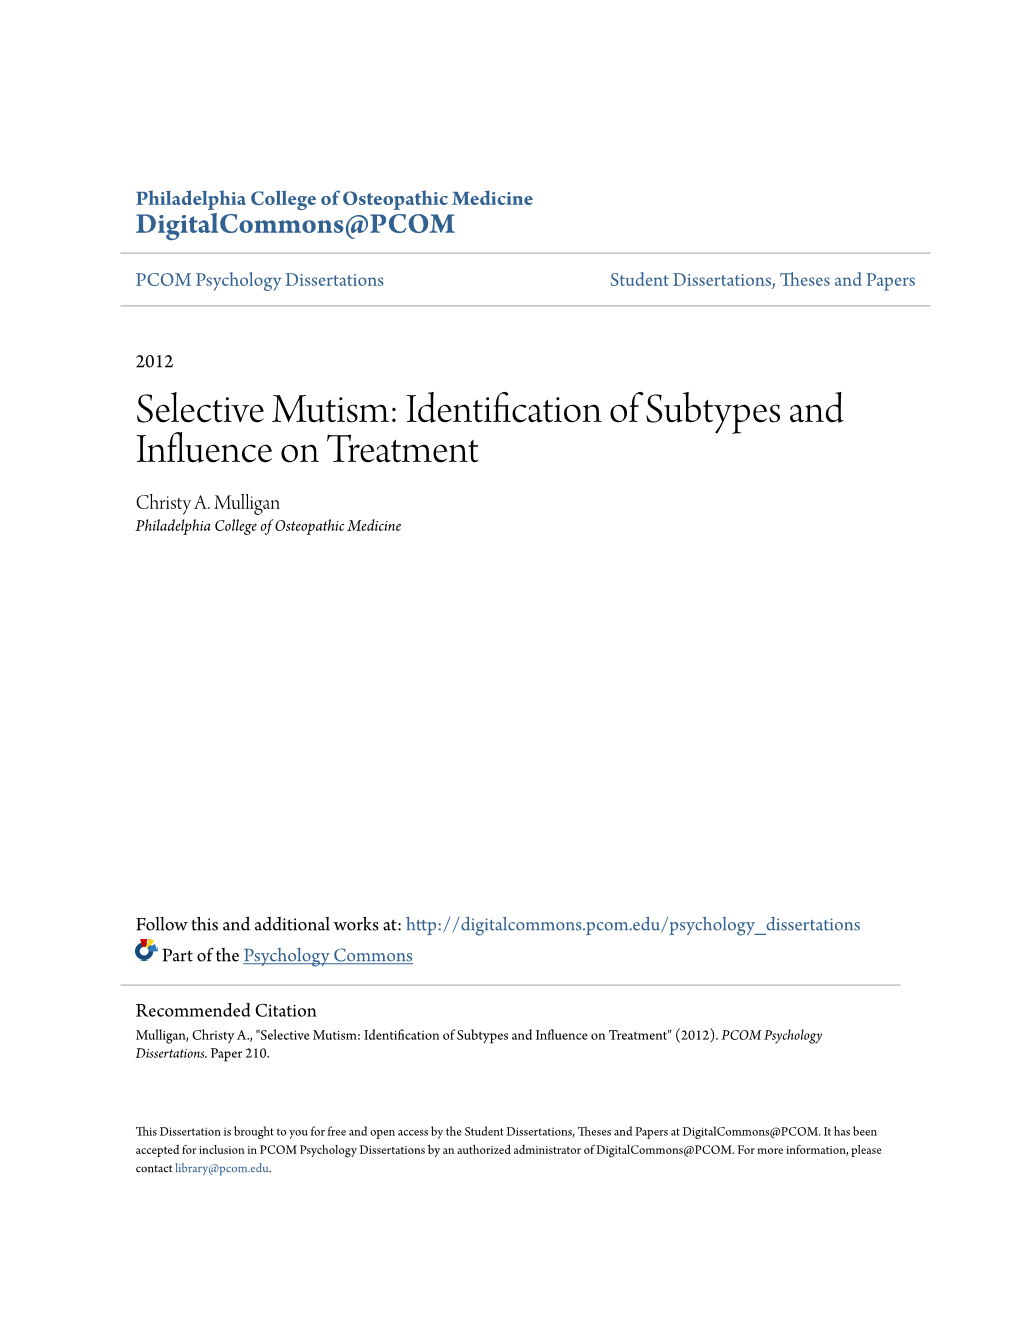 Selective Mutism: Identification of Subtypes and Influence on Treatment Christy A